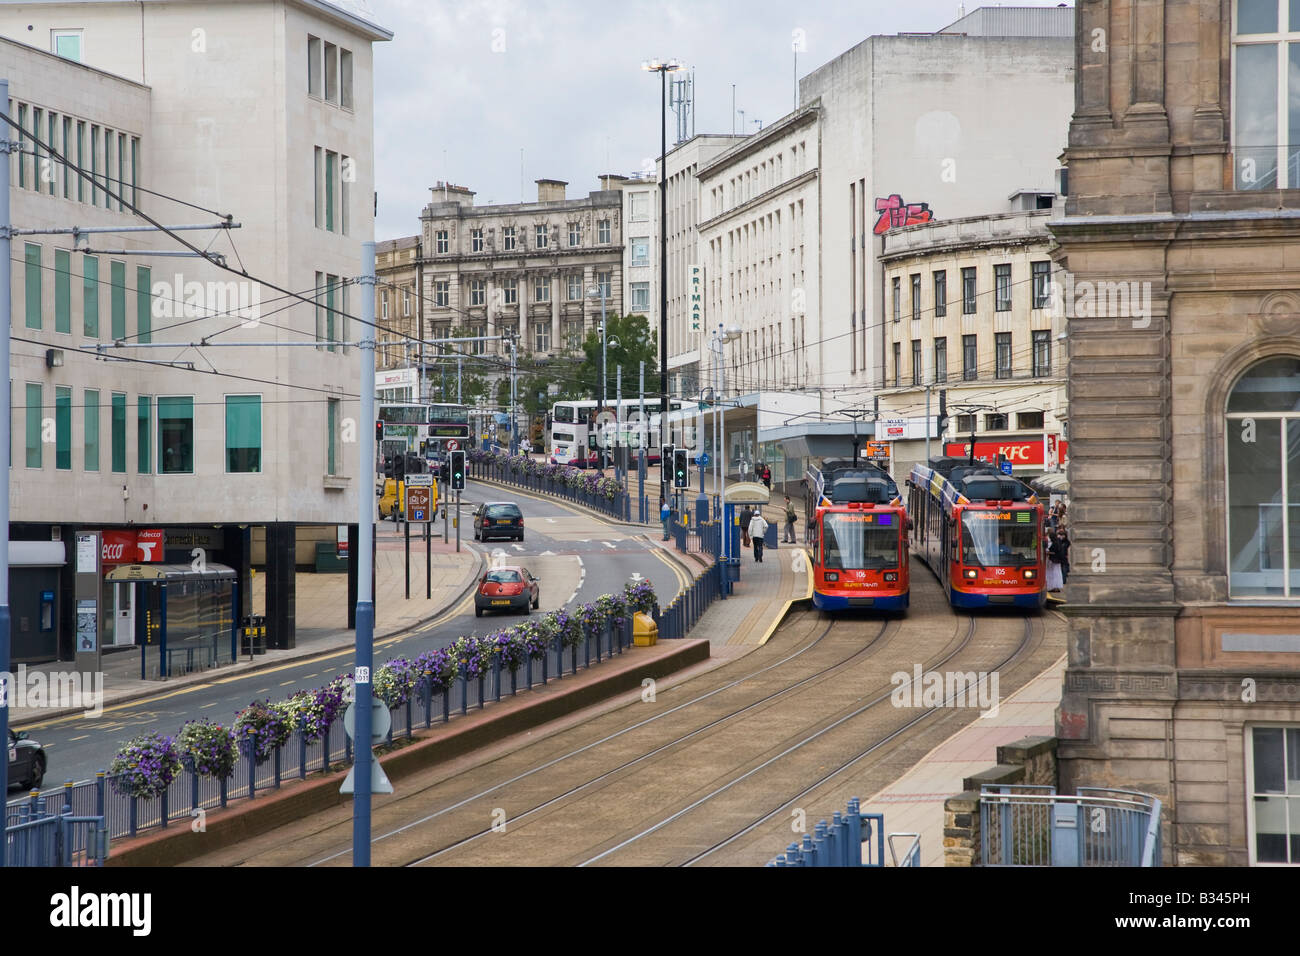 Fitzalan Square Sheffield with two Supertrams Stock Photo